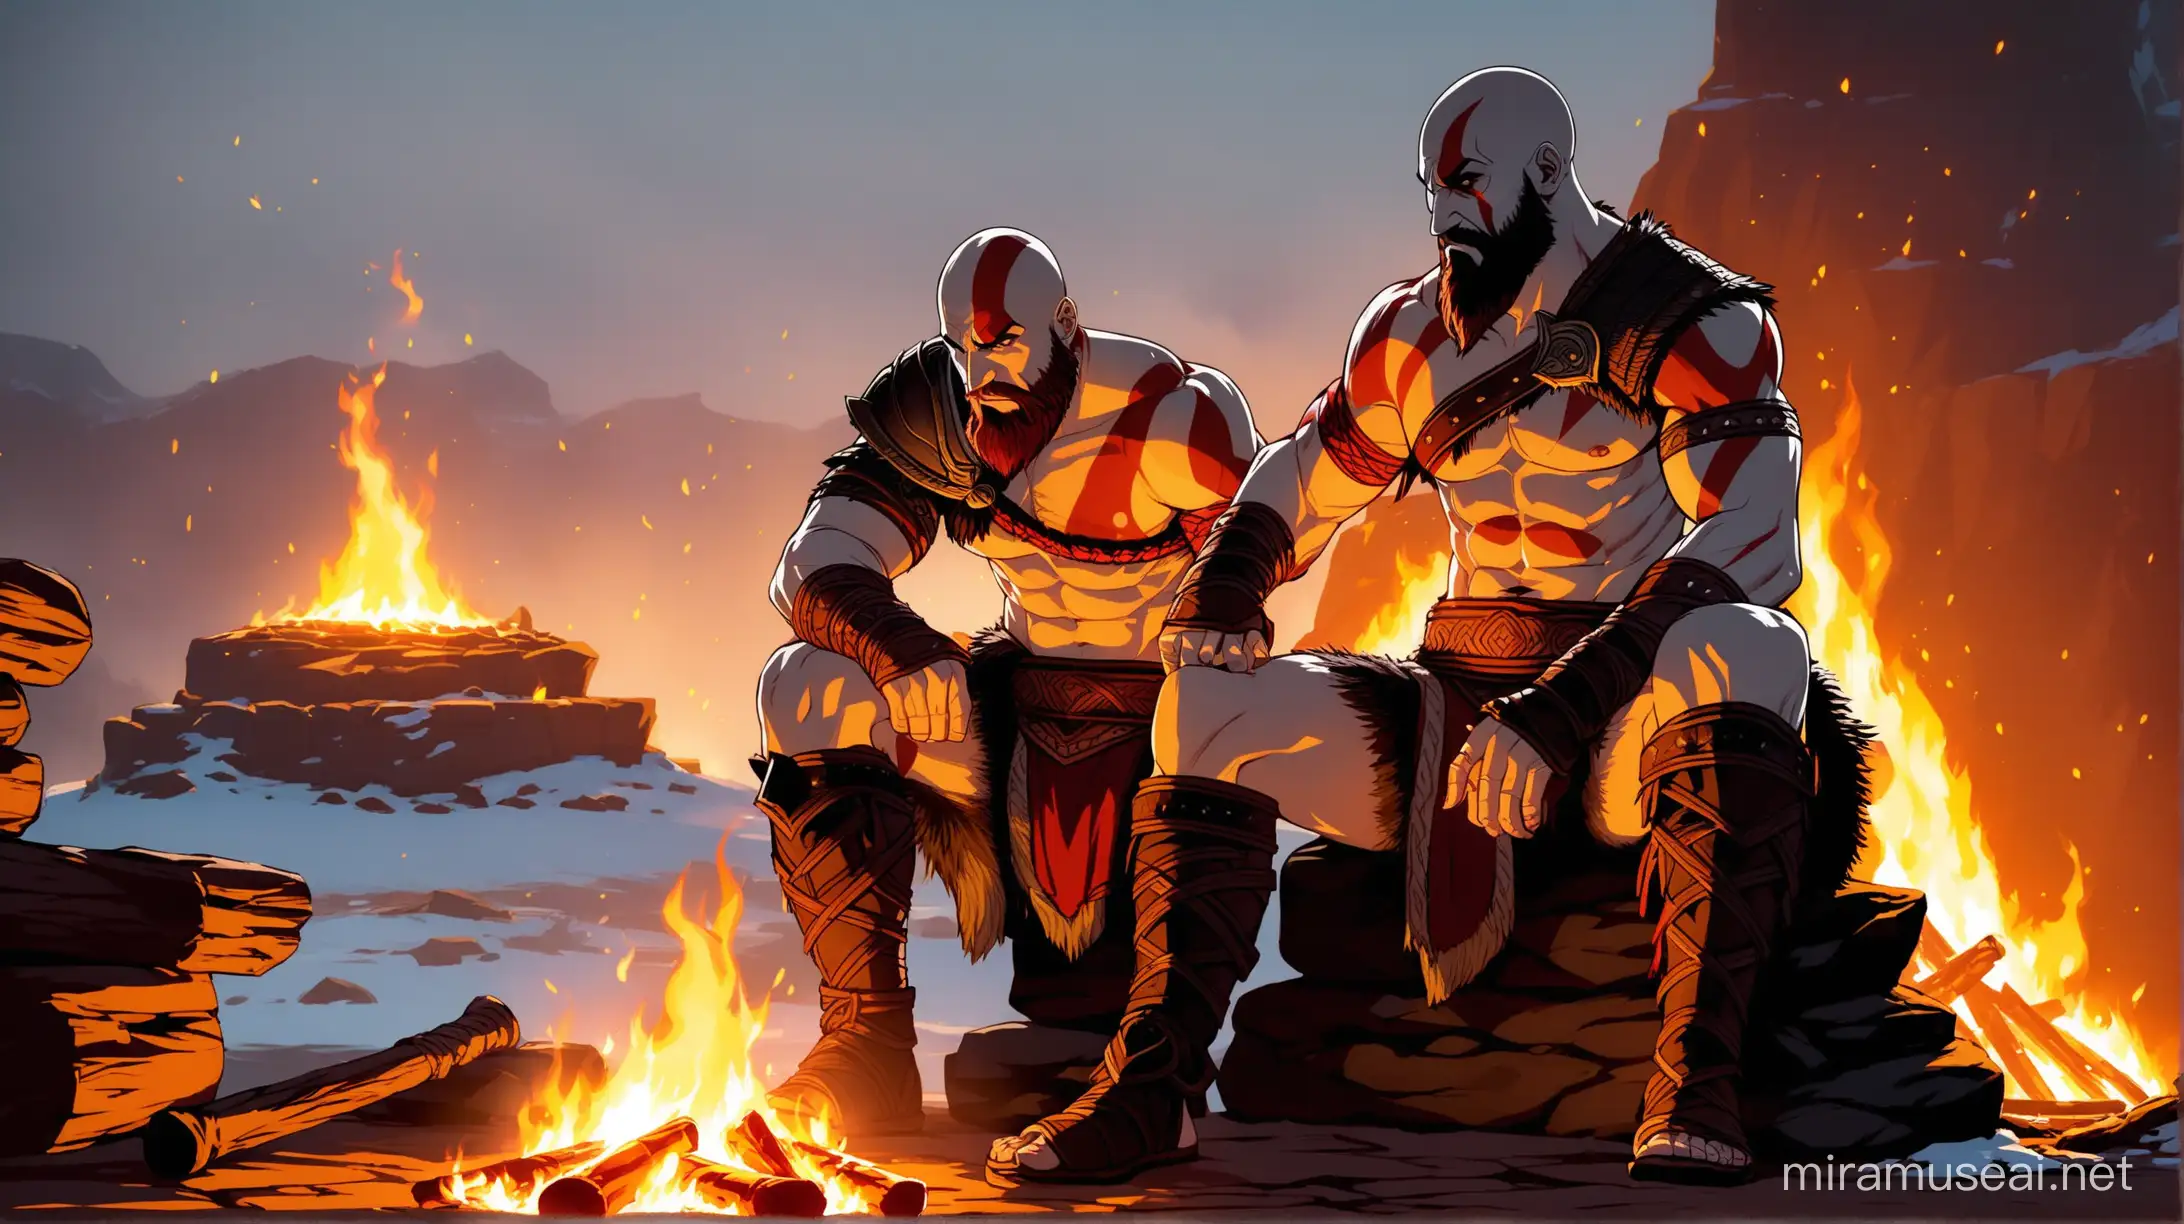 Kratos from god of war Ragnarok is sitting by a fire